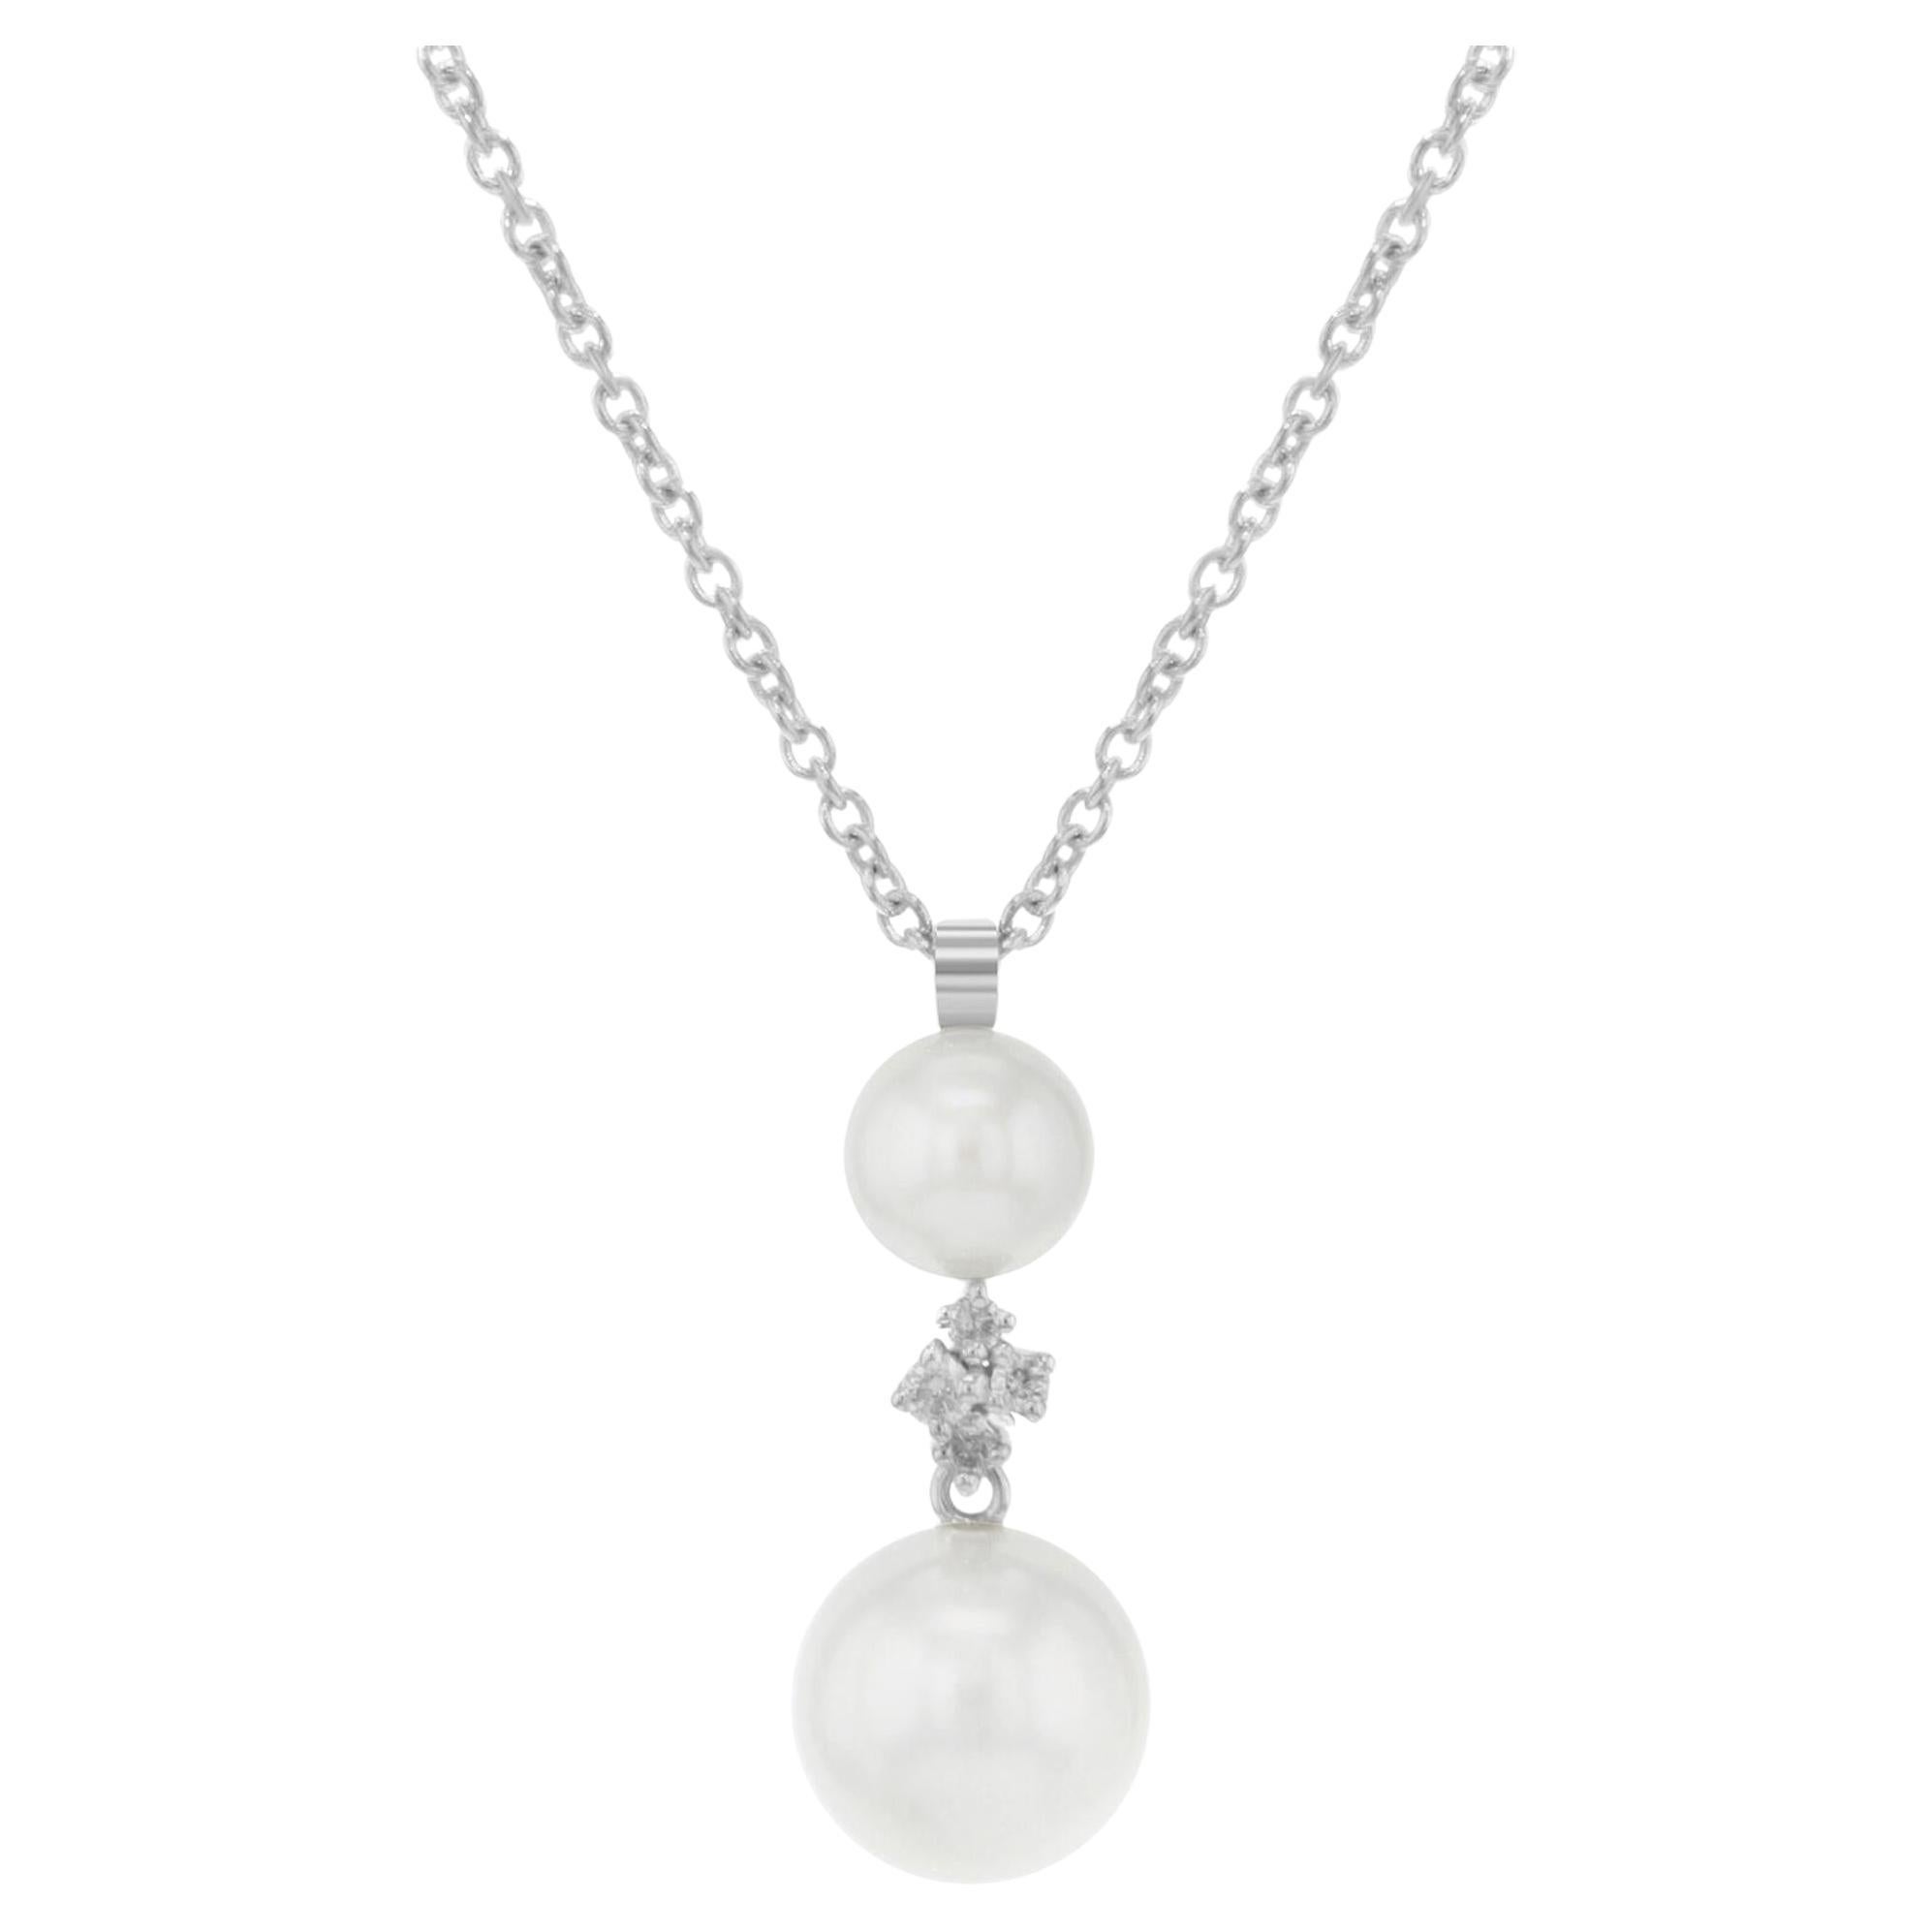 Bliss by Damiani Ribes Ext. Pearl Diamond Pendant Necklace 18k White Gold 0.04Ct For Sale